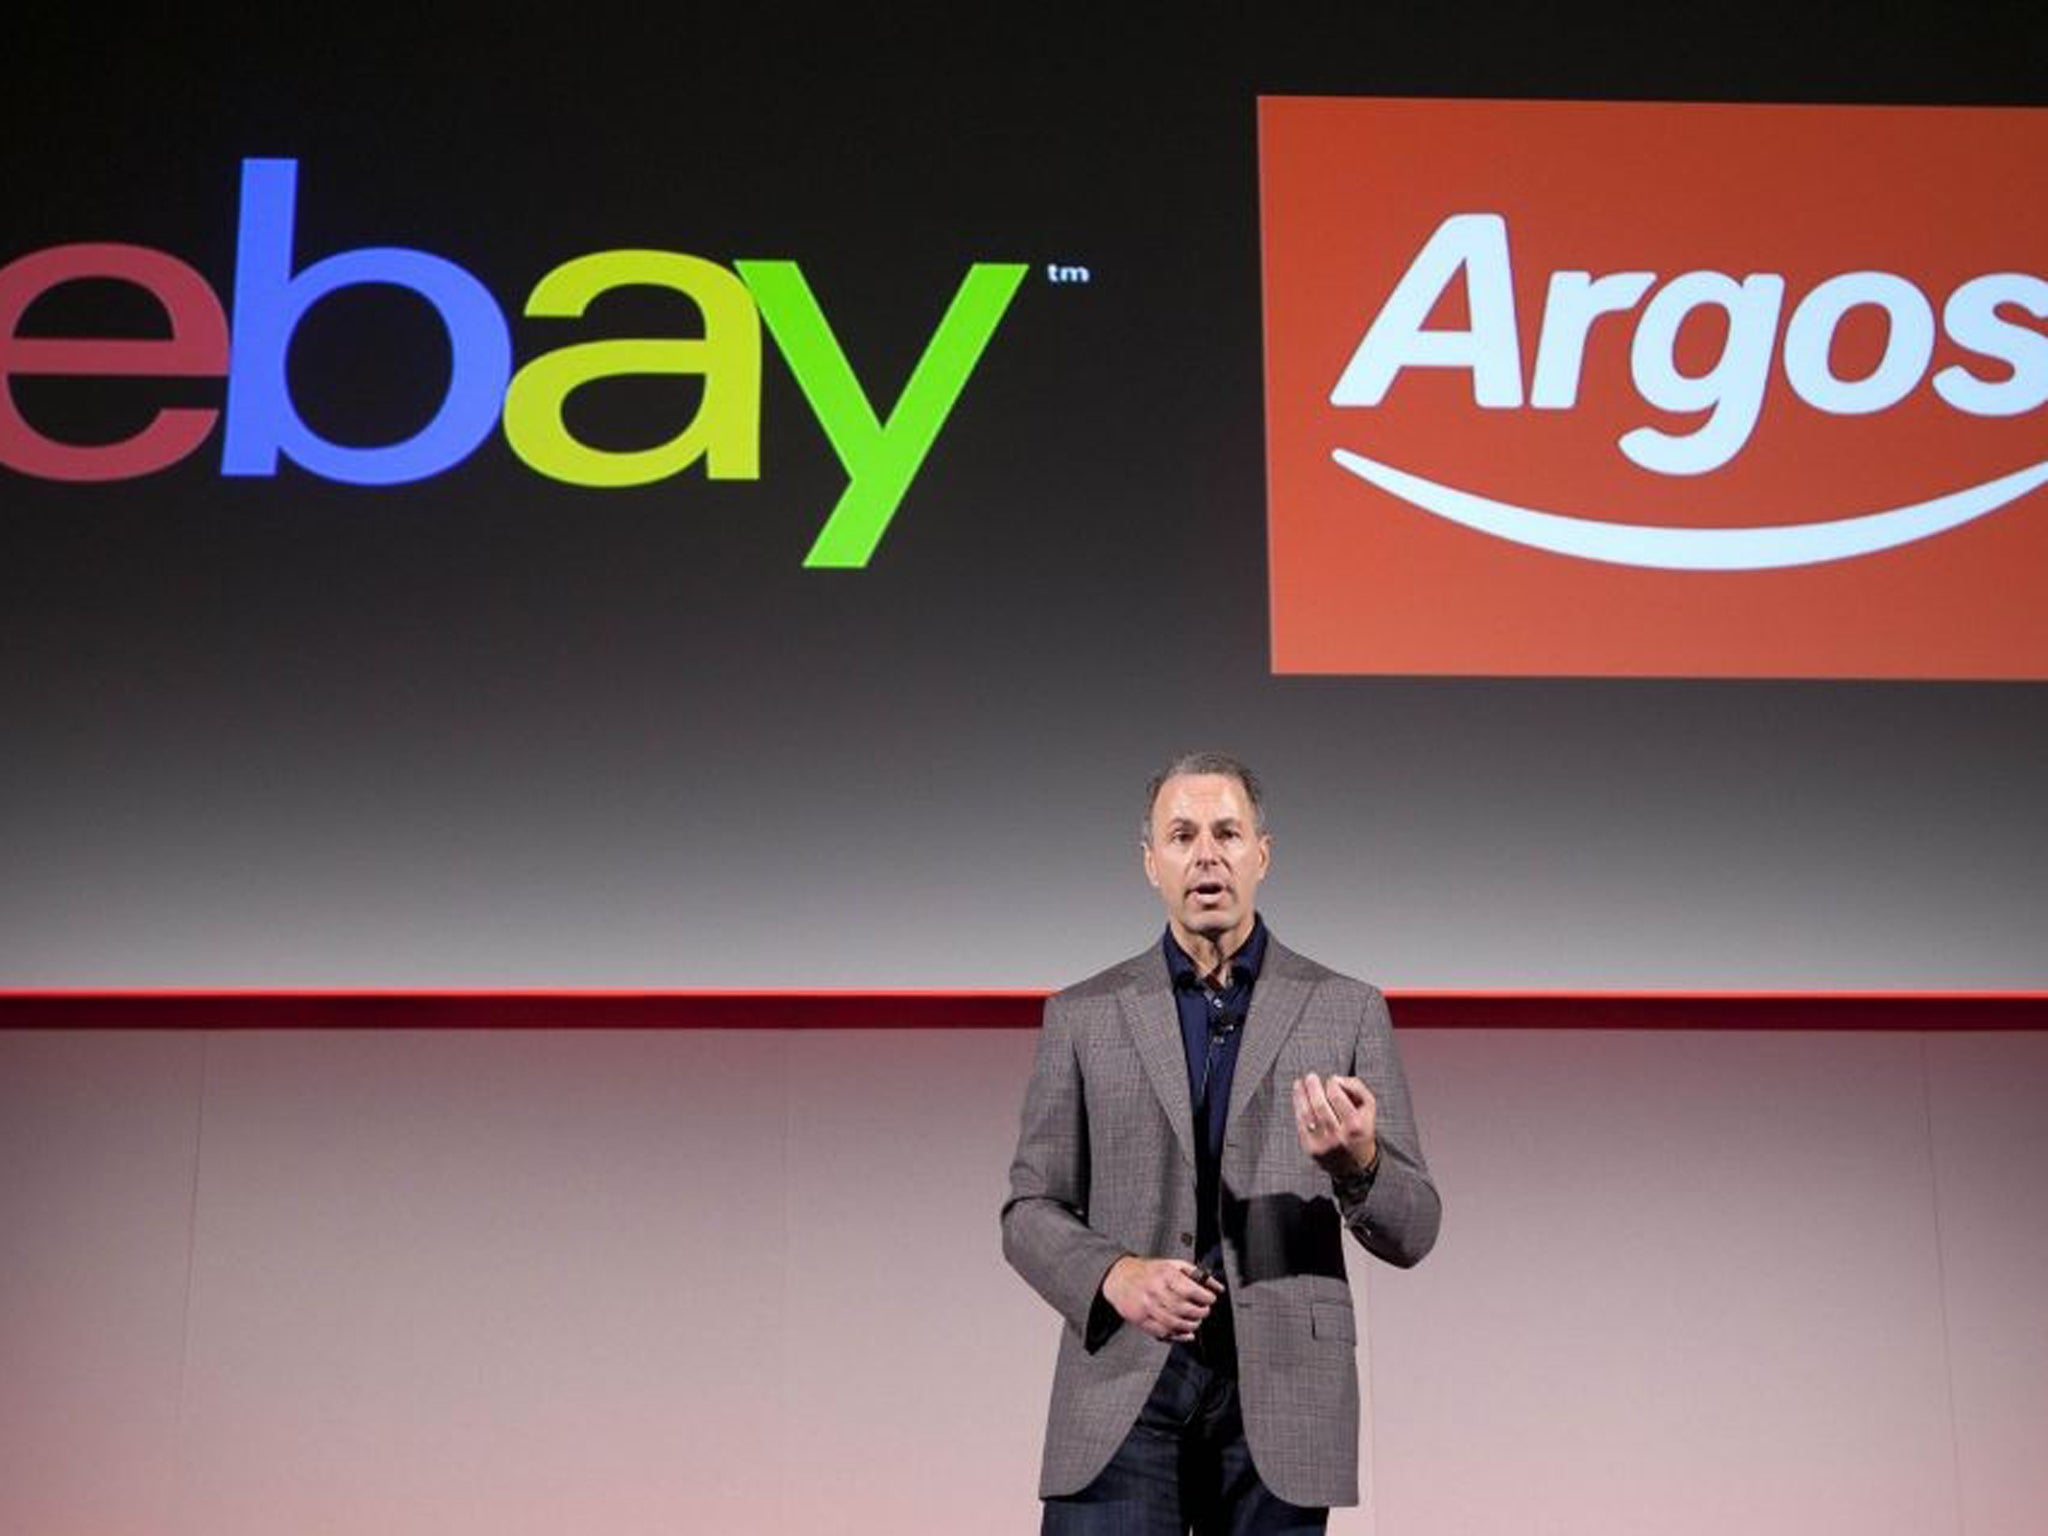 At least 50 eBay merchants and around 150 Argos stores will participate in the Click & Collect service